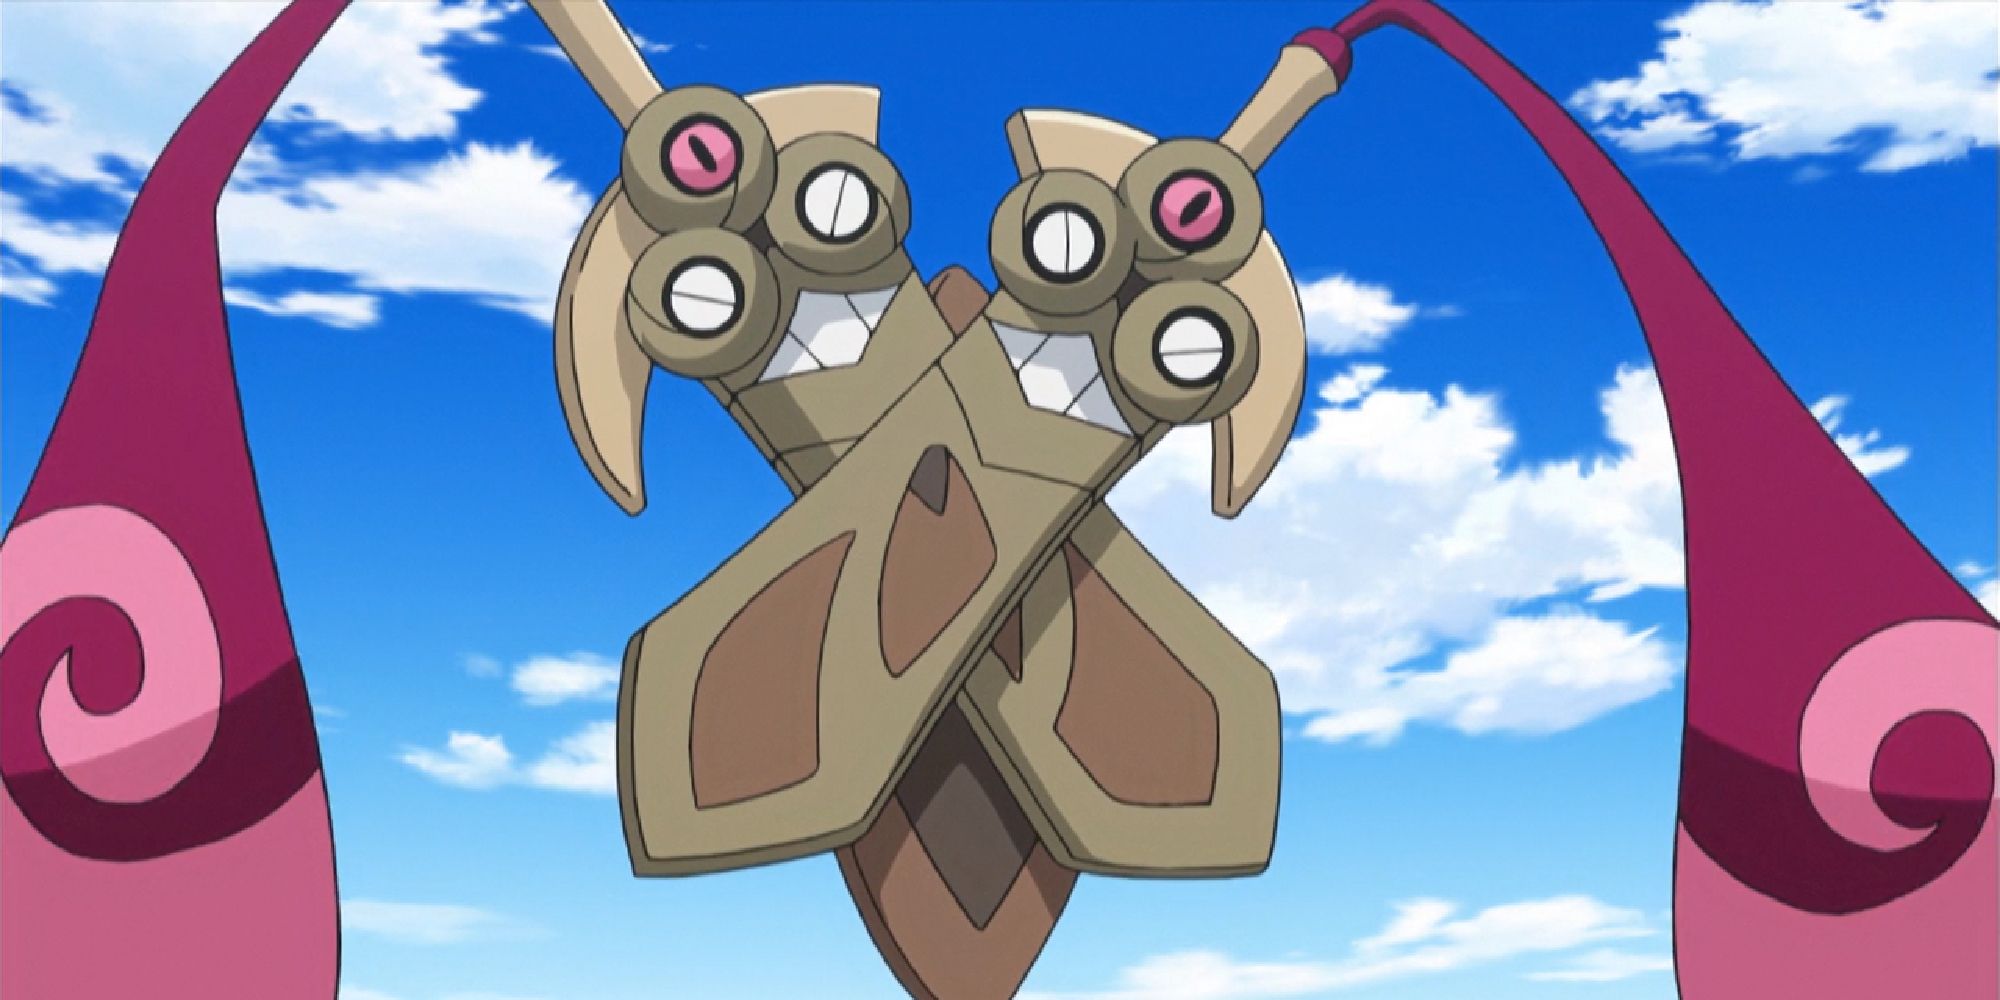 A Doublade appearing in the Pokemon anime